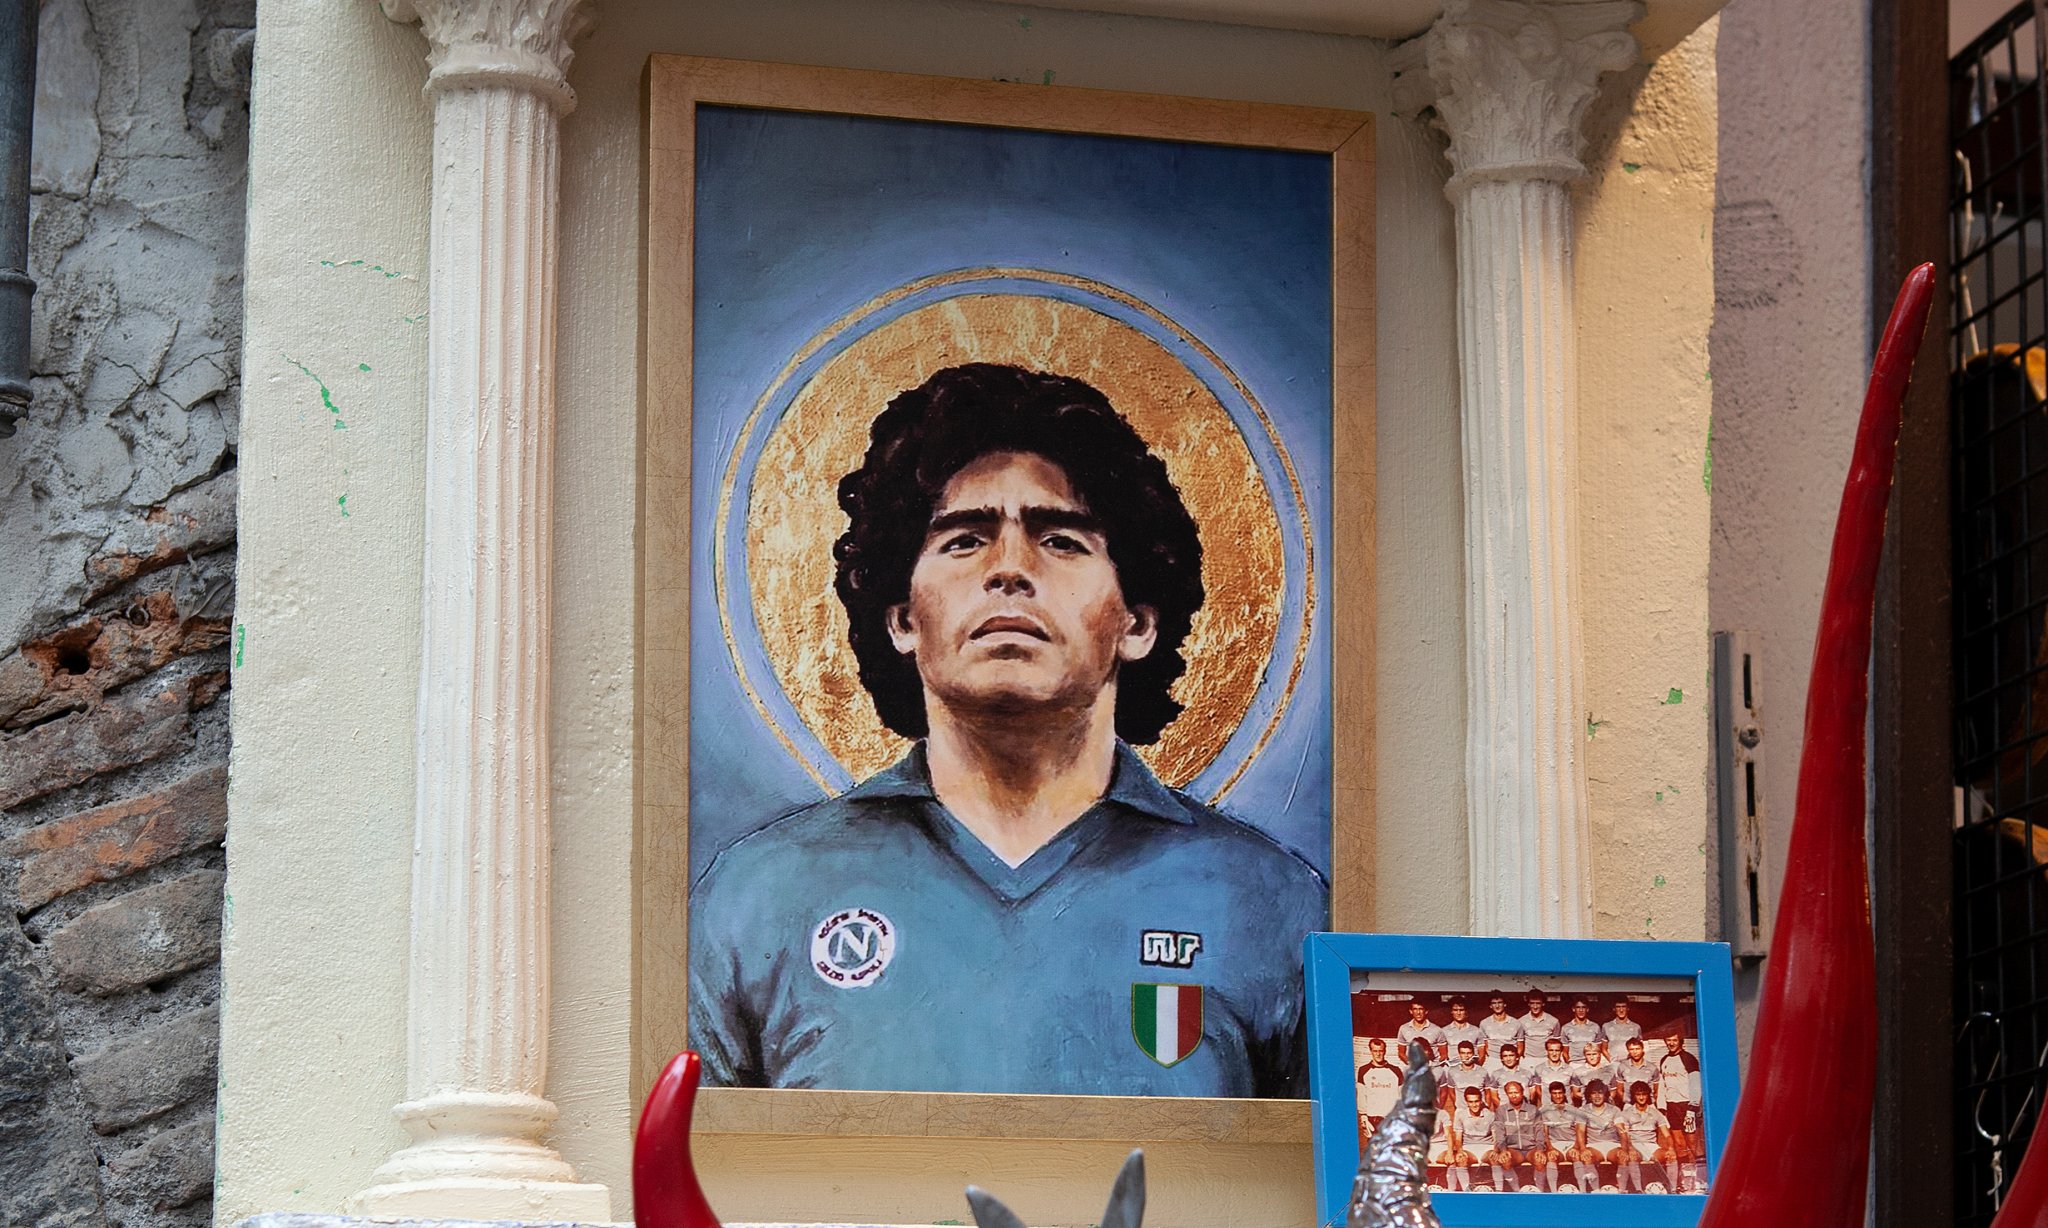 The cult of Diego Maradona – in pictures